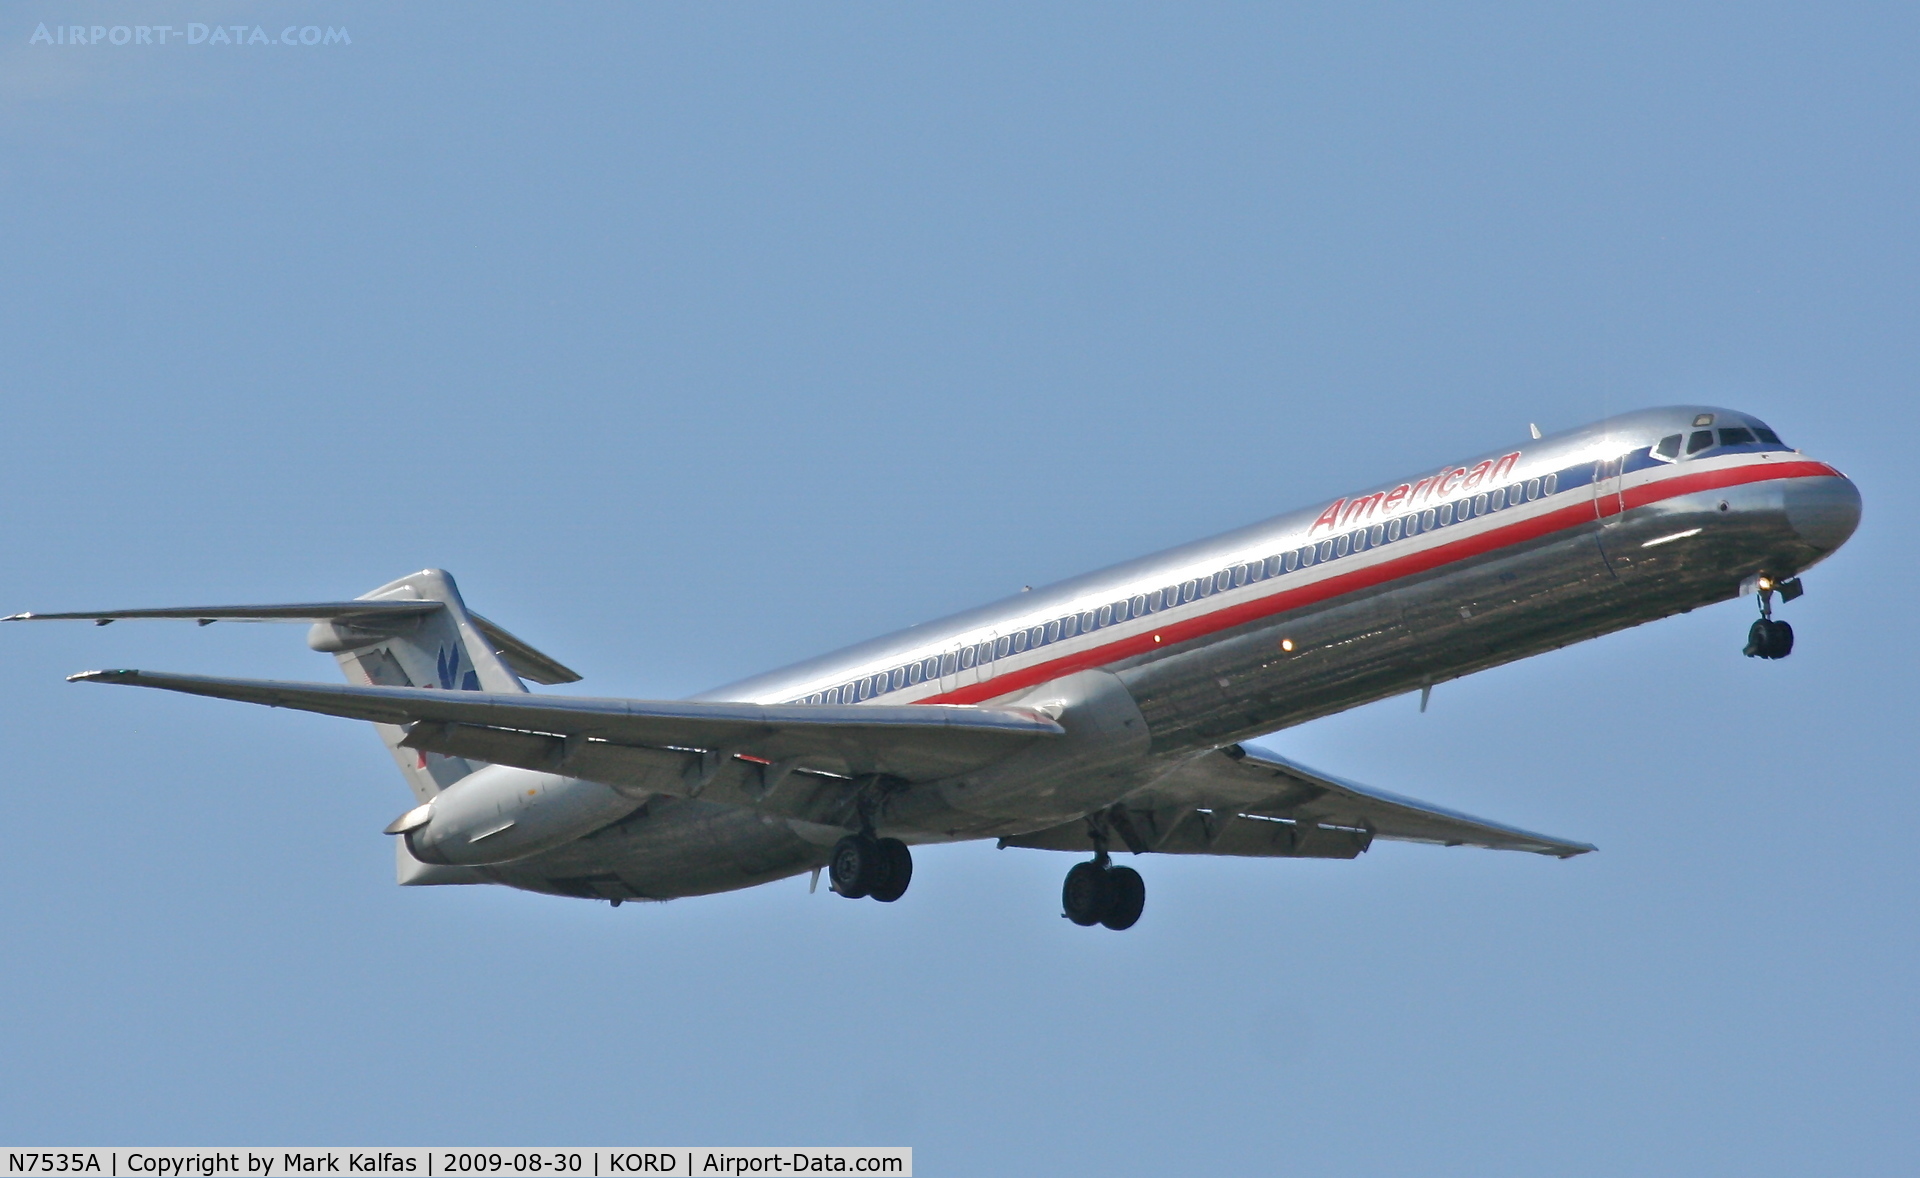 N7535A, 1990 McDonnell Douglas MD-82 (DC-9-82) C/N 49989, American Airlines MD-82, N7535A on final RWY 10 KORD